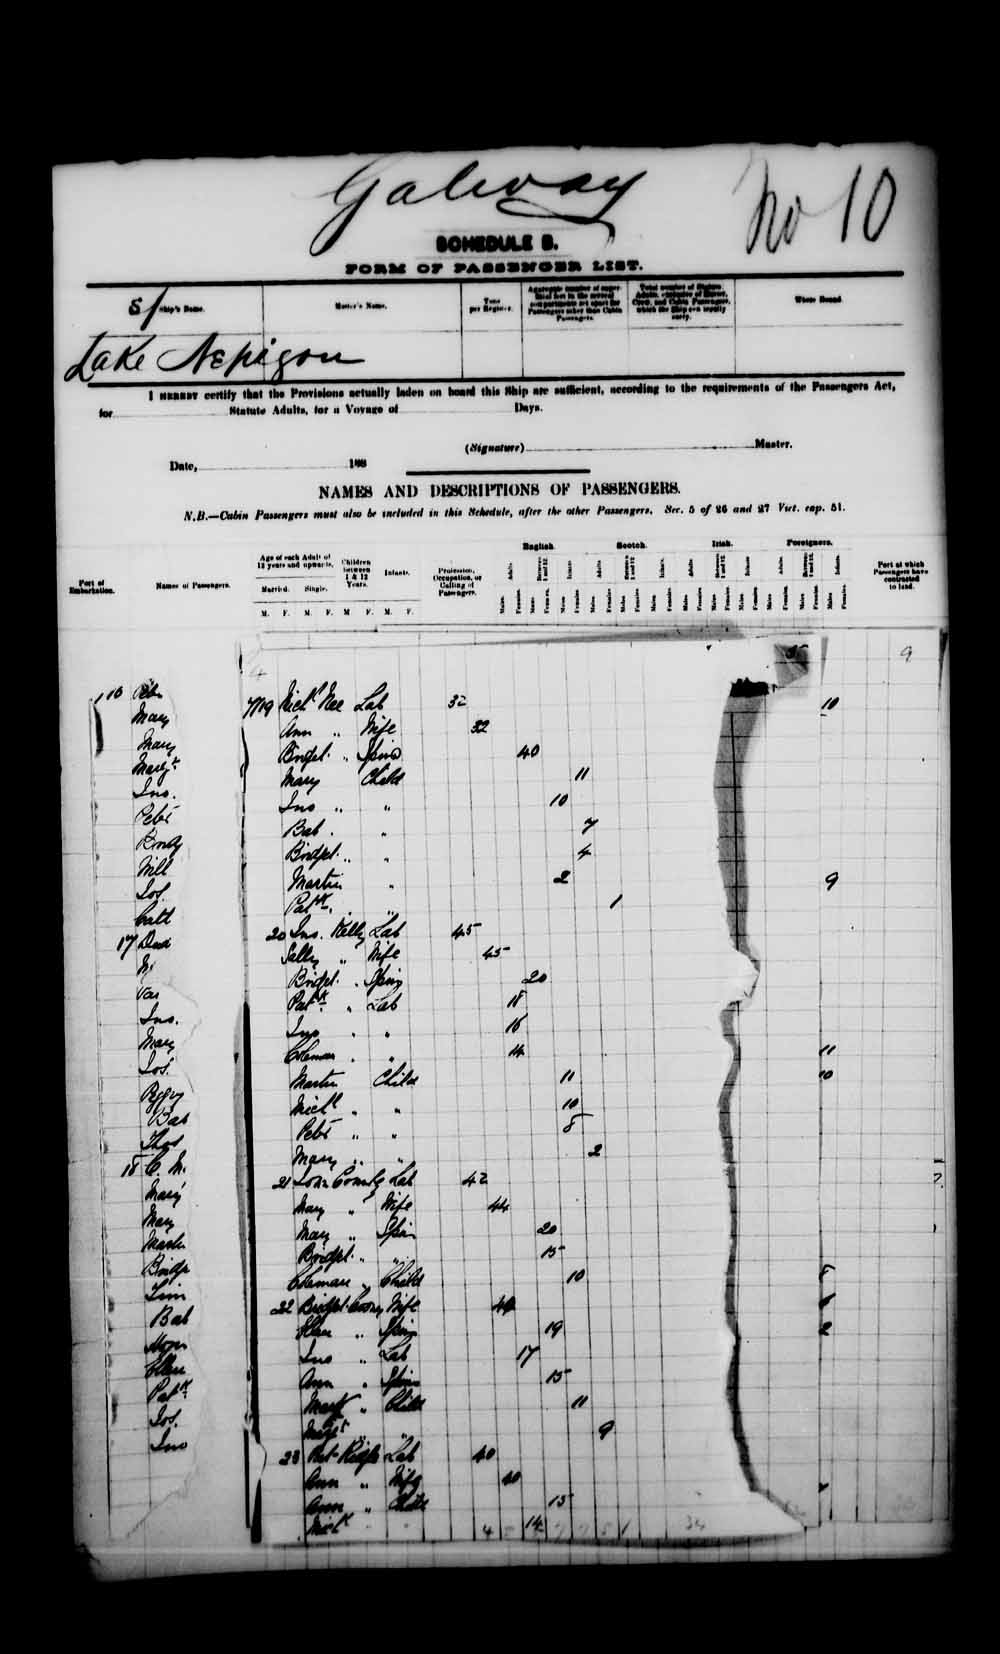 Digitized page of Passenger Lists for Image No.: e003541460